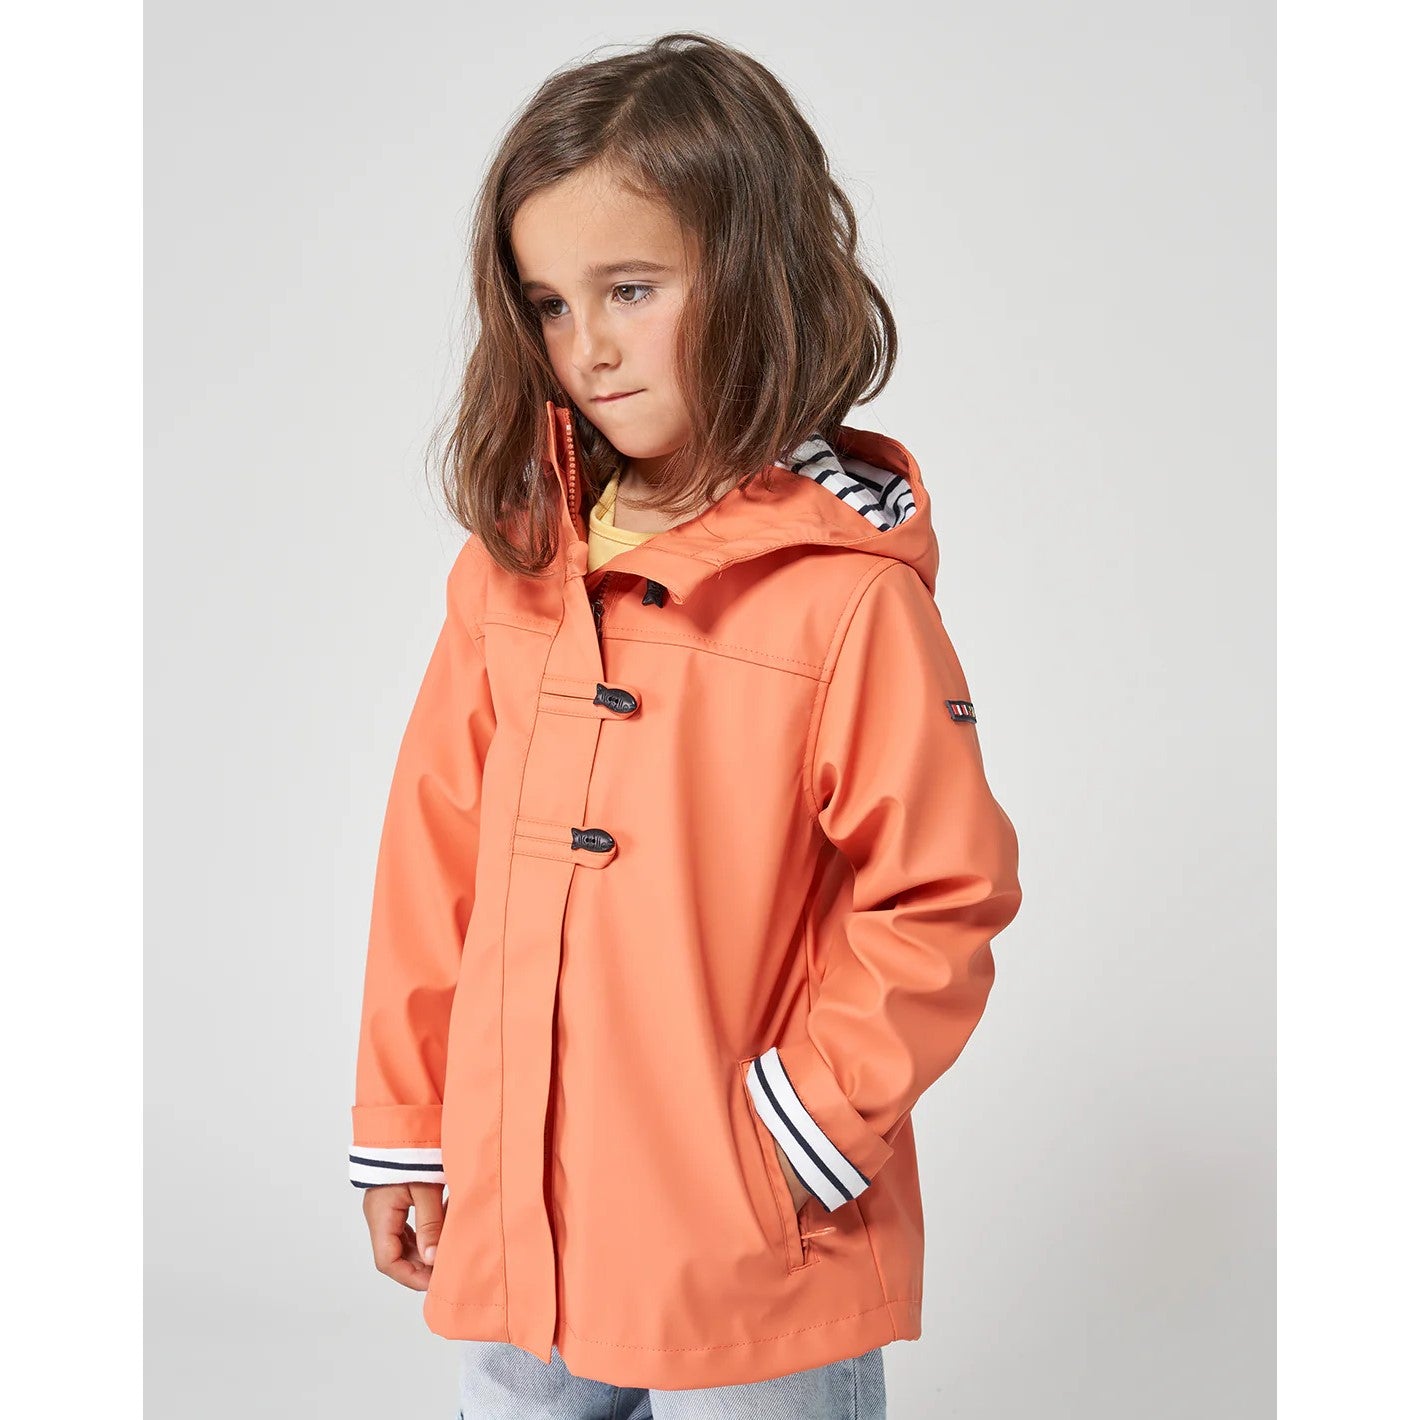 Sailor Raincoat with Striped Lining for Youth